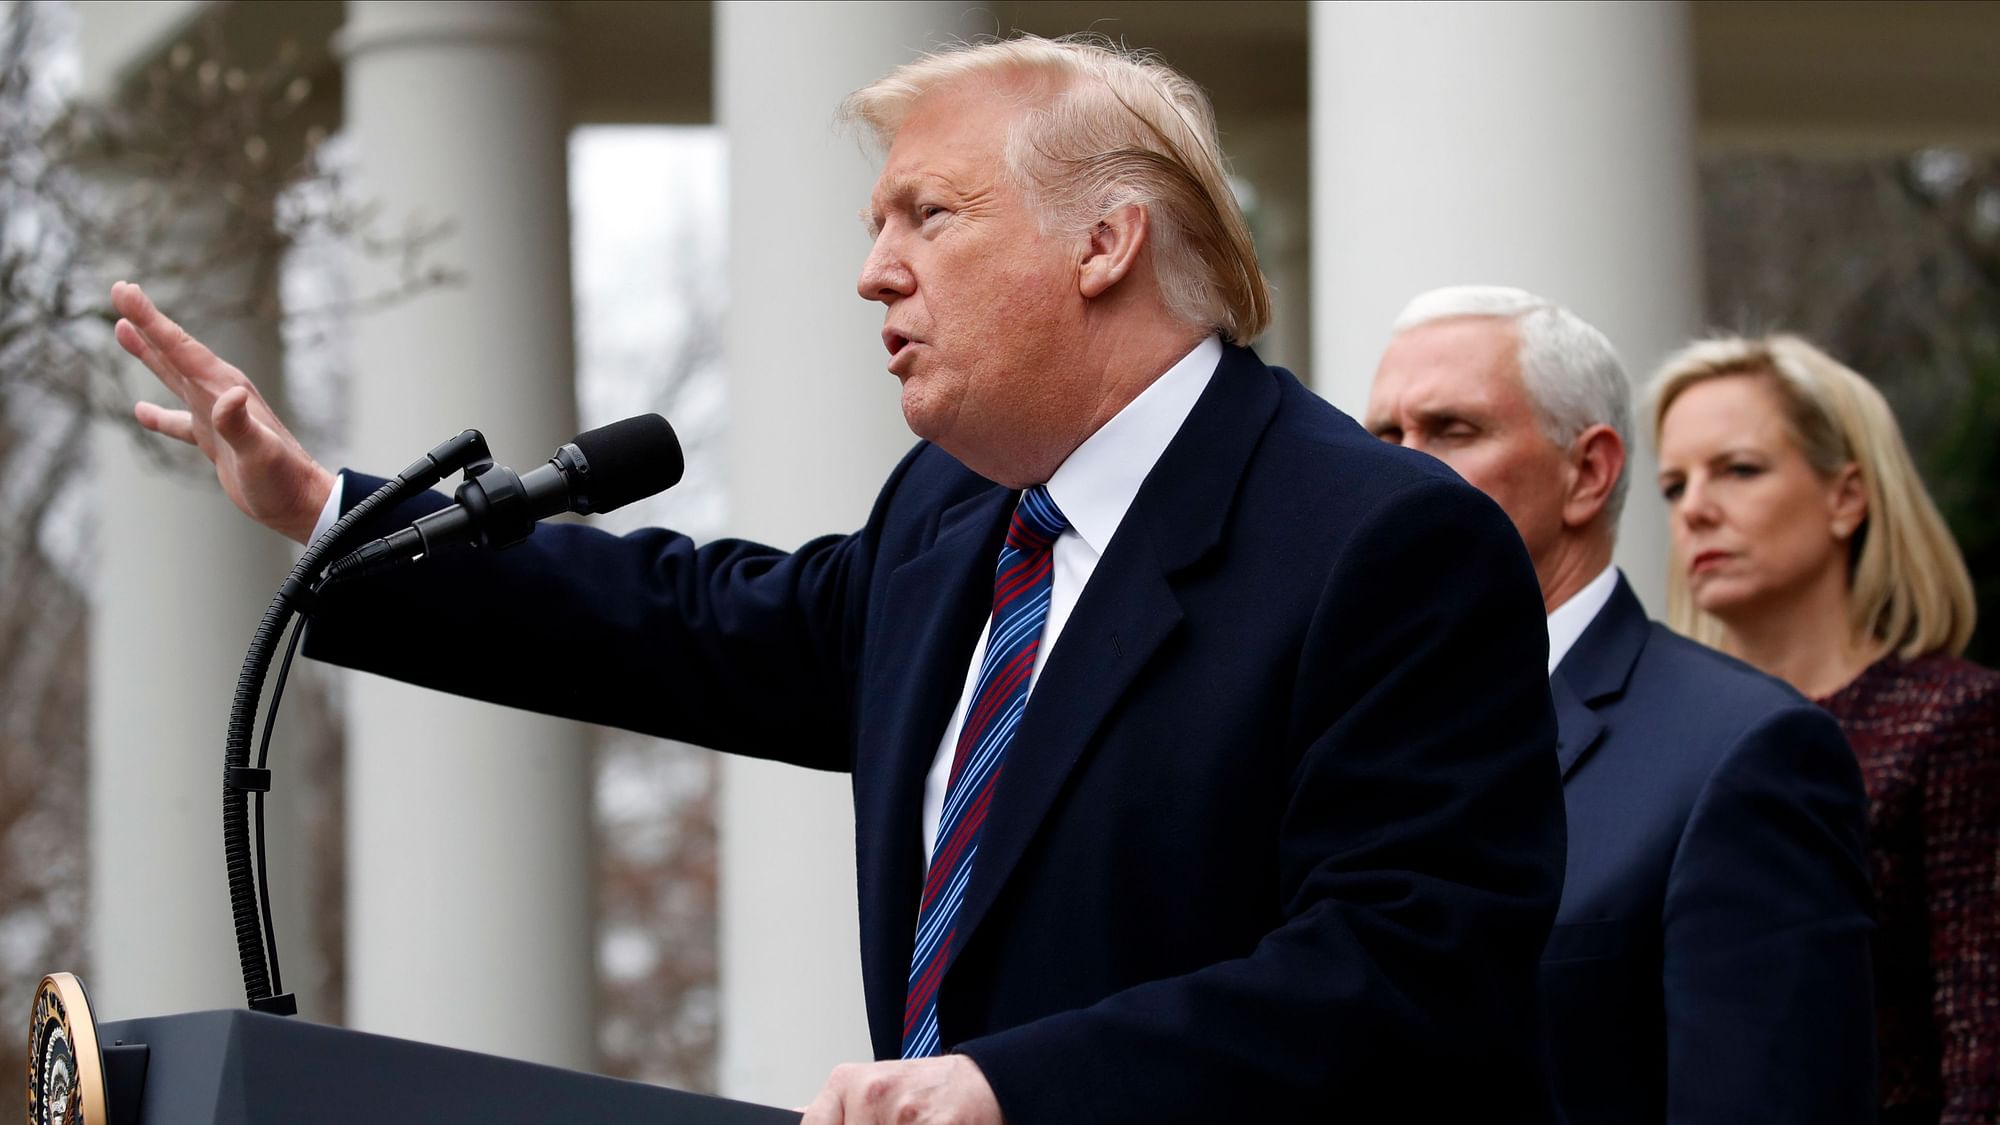 US President Donald Trump speaks in the Rose Garden of the White House after a meeting with Congressional leaders on border security.